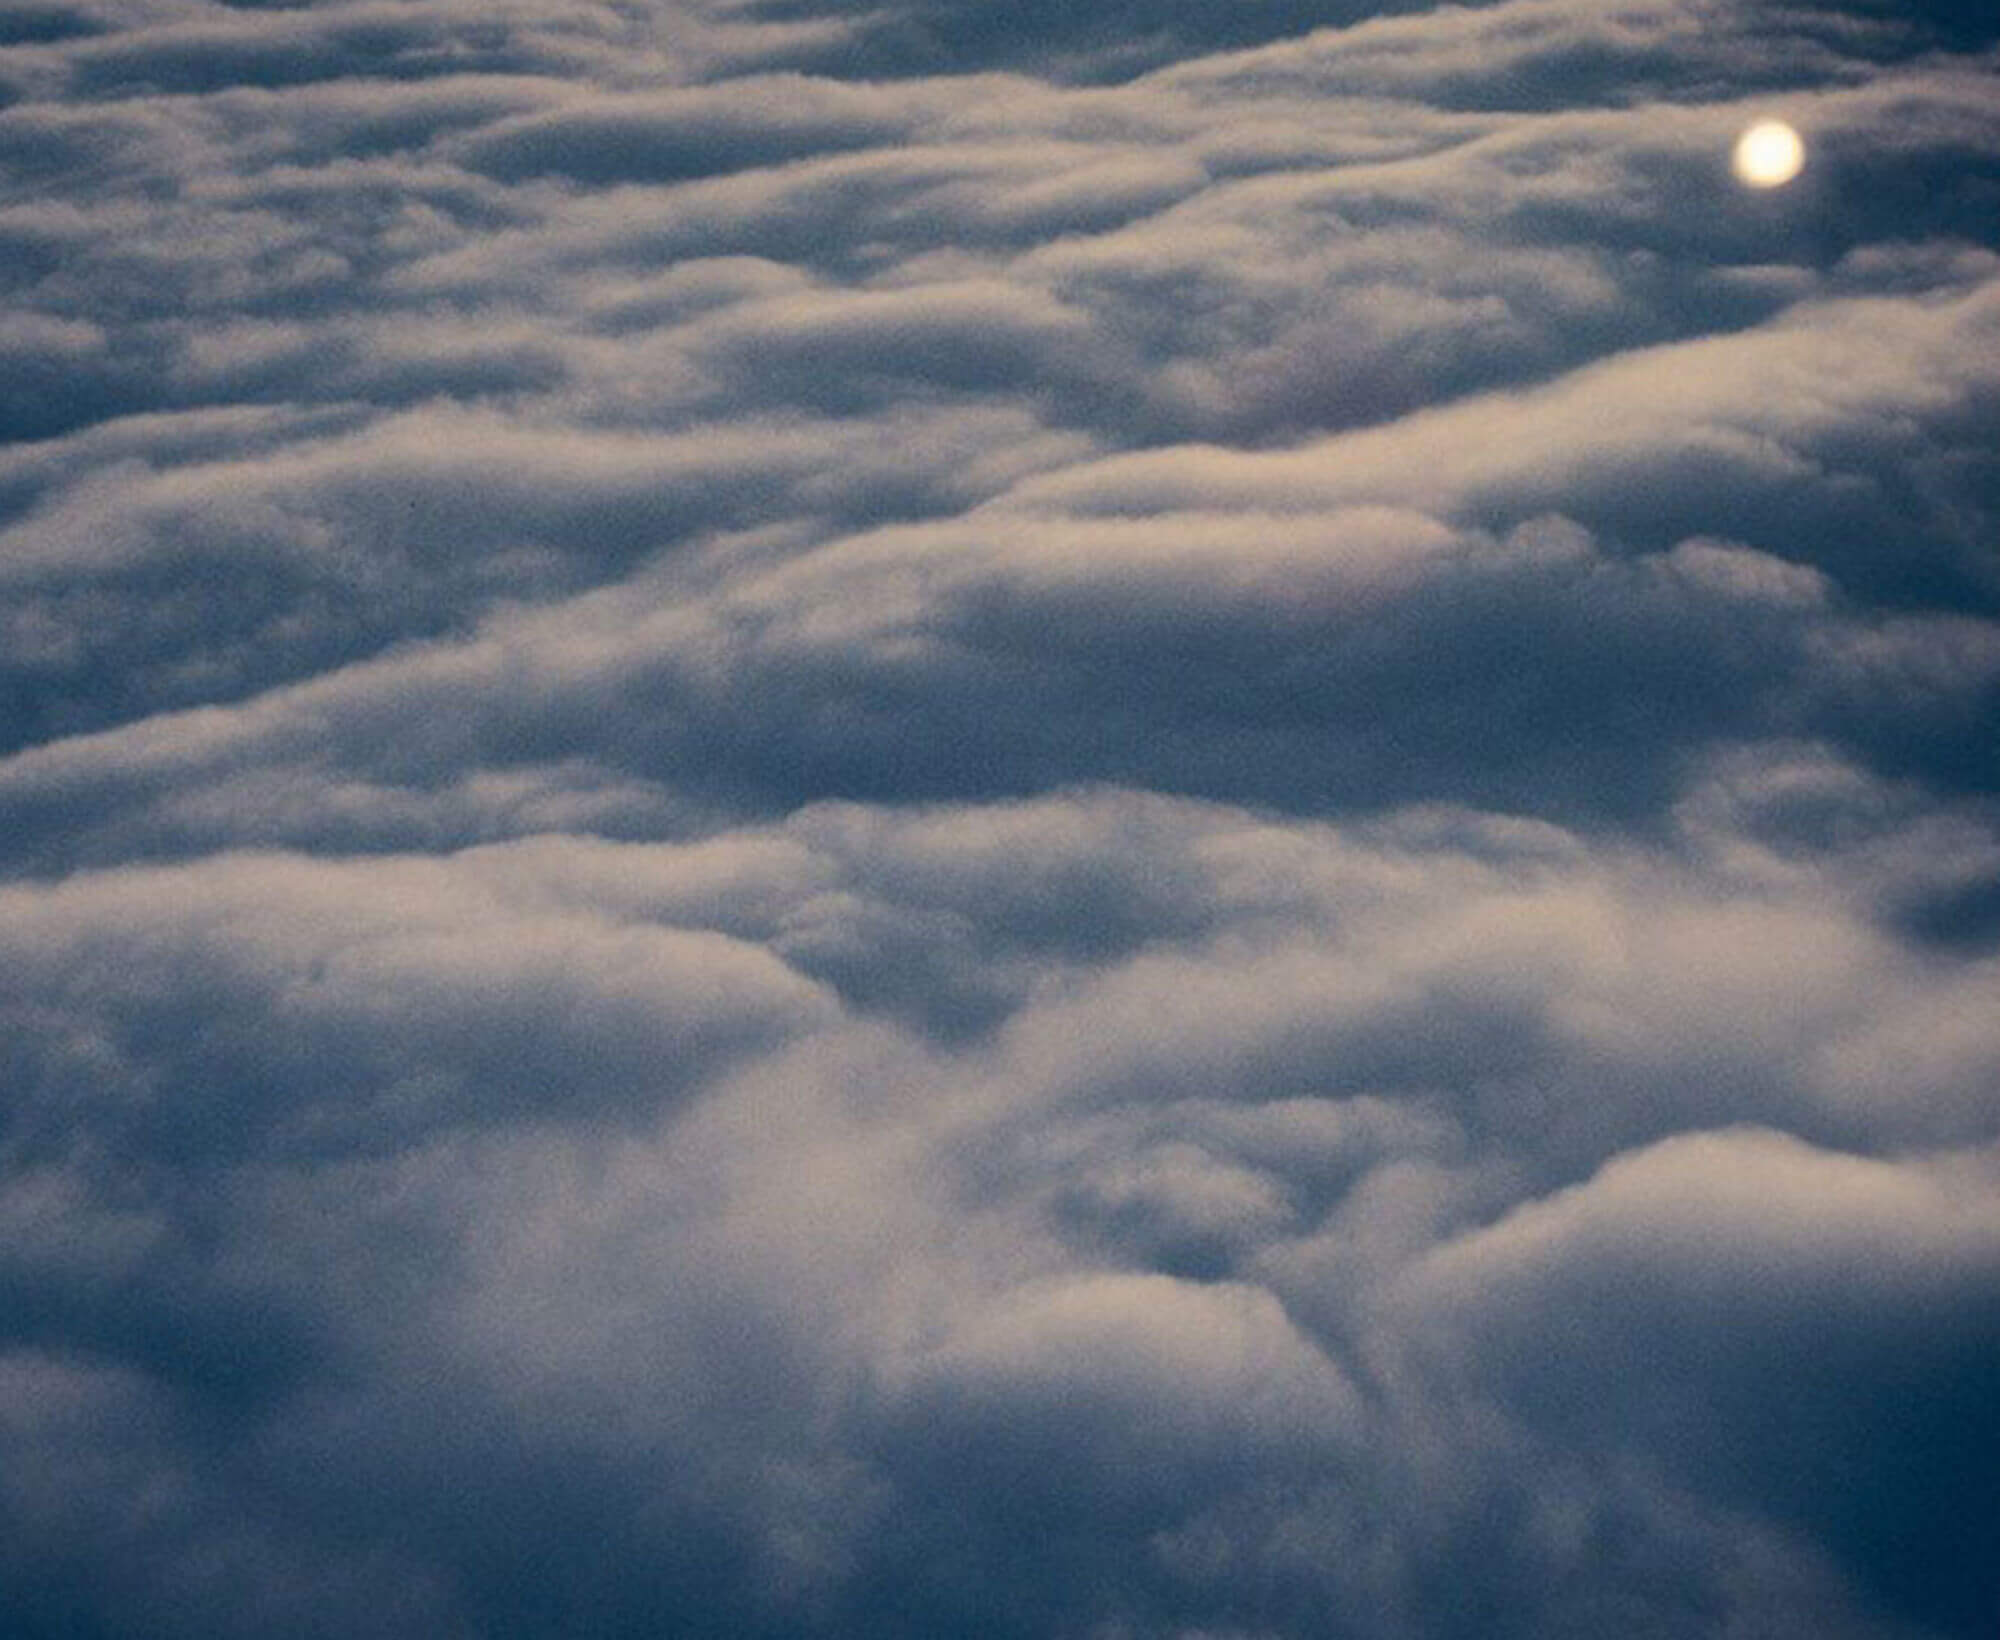 Colour photograph of a layer of clouds taken from above, most likely from the window of an airplane at sunrise or sunset.